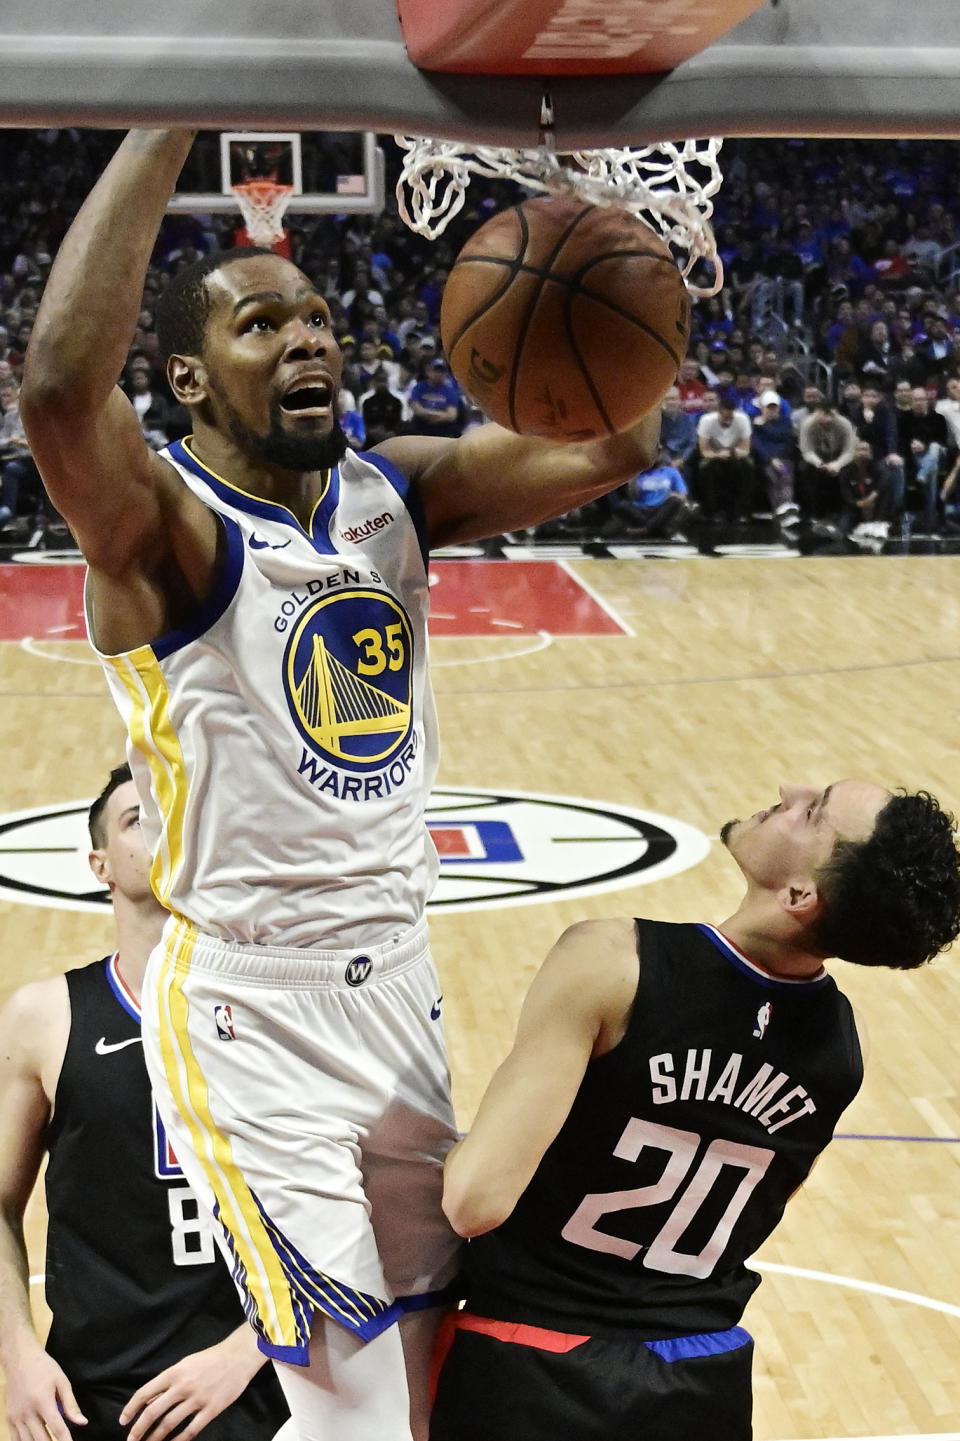 FILE - In this April 21, 2019, file photo, Golden State Warriors forward Kevin Durant, top, dunks as Los Angeles Clippers guard Landry Shamet defends during the second half in Game 4 of a first-round NBA basketball playoff series in Los Angeles. Rarely relevant at the same time on the basketball court, the Knicks and Nets are front and center in the free agency race, two of the teams best positioned to make a splash when the market opens. Both can afford two top players, with hopes of landing not only a Kevin Durant or Kyrie Irving, but possibly even both. (AP Photo/Mark J. Terrill, File)